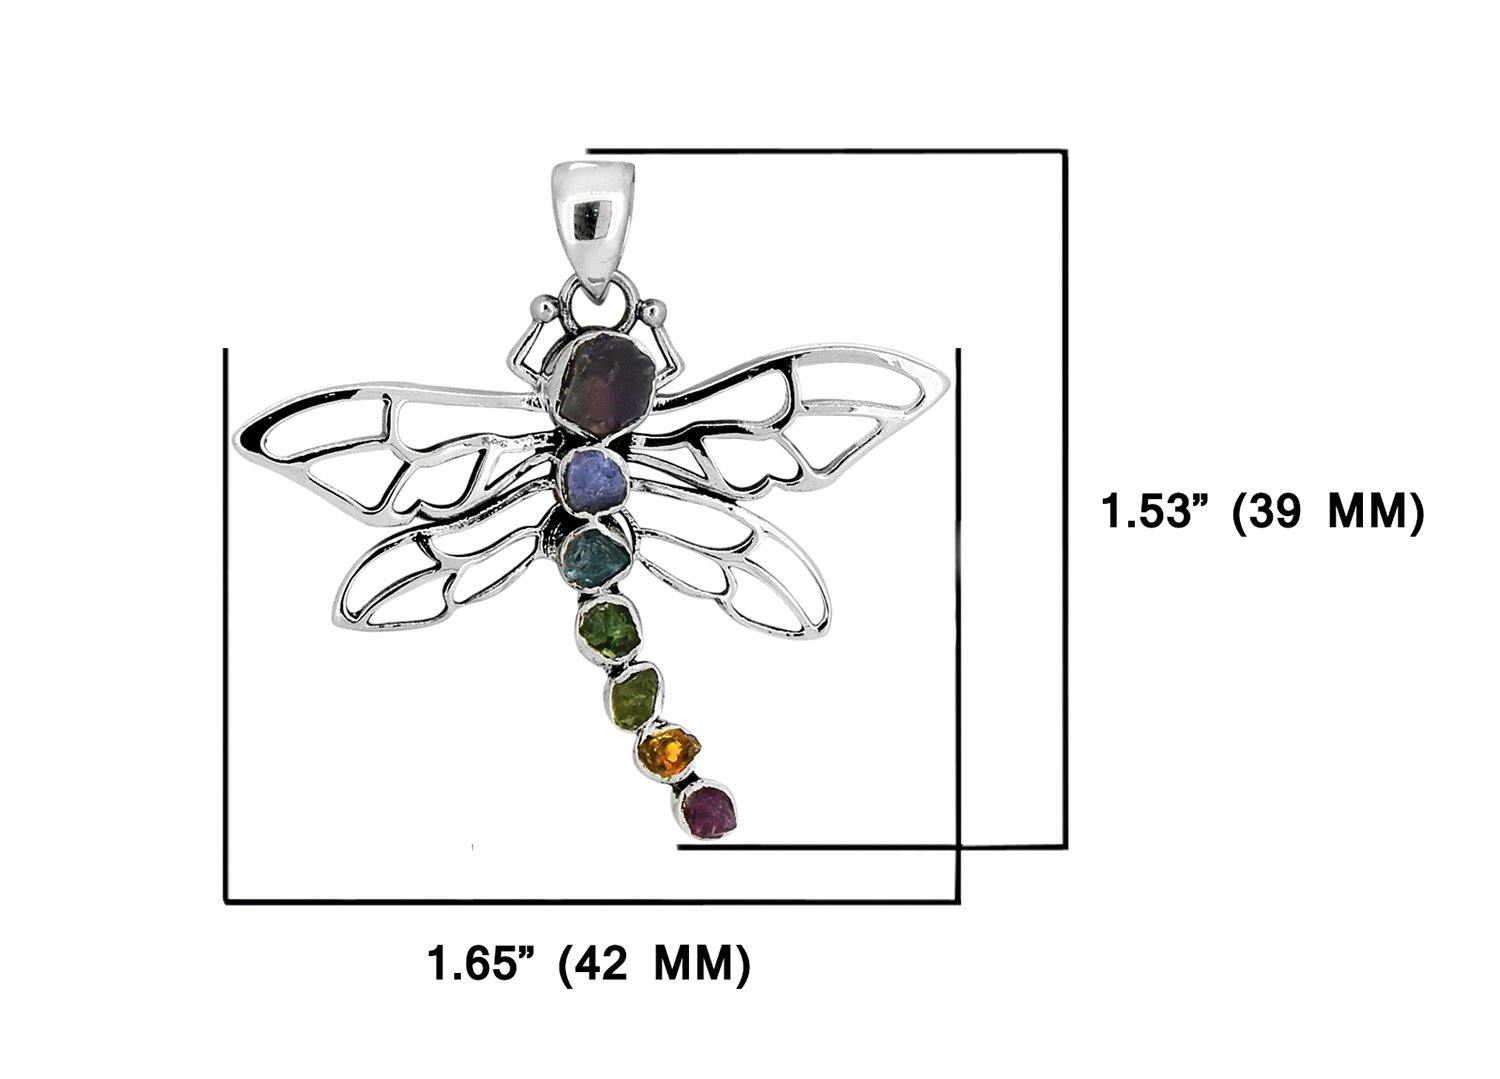 Rough Chakra Healing Stone Solid Sterling Silver Chain Dragonfly Pendant Necklace Jewelry - YoTreasure